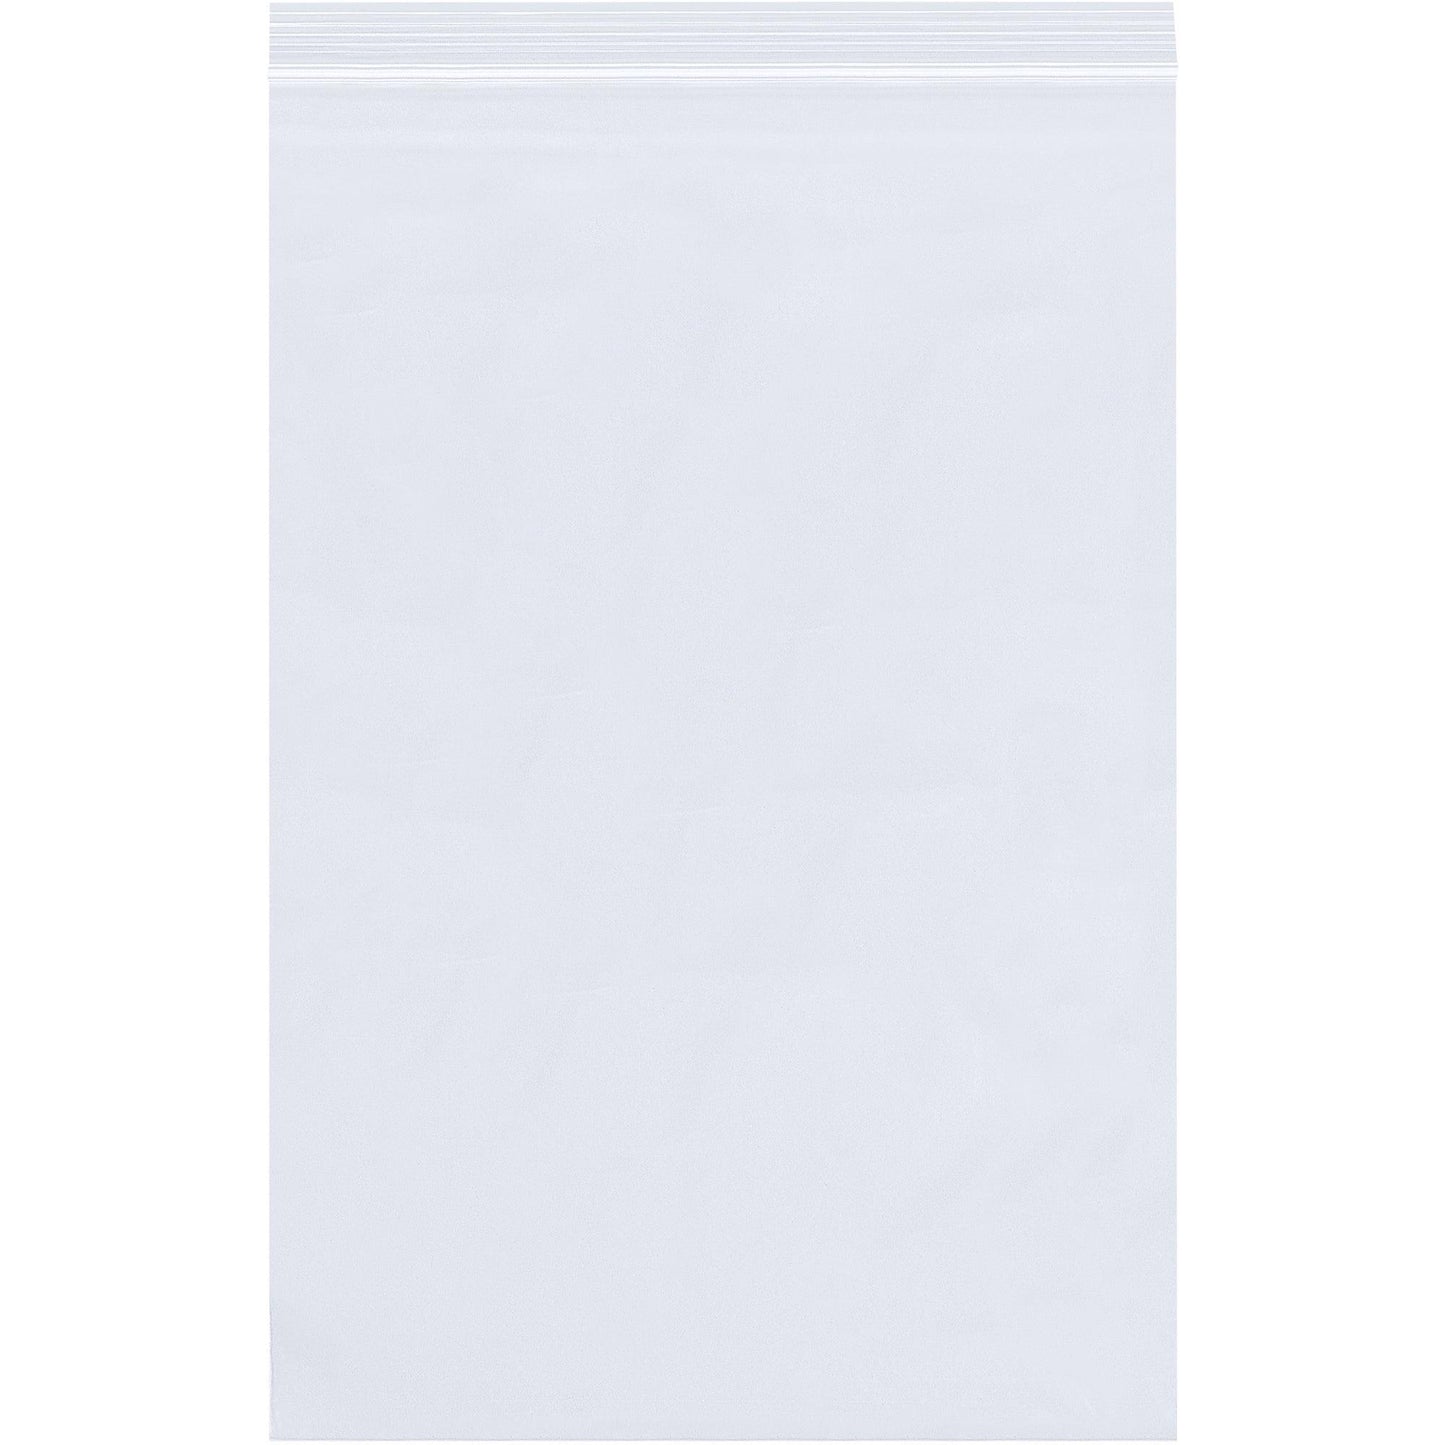 8 x 8" - 4 Mil Reclosable Poly Bags - PB3755